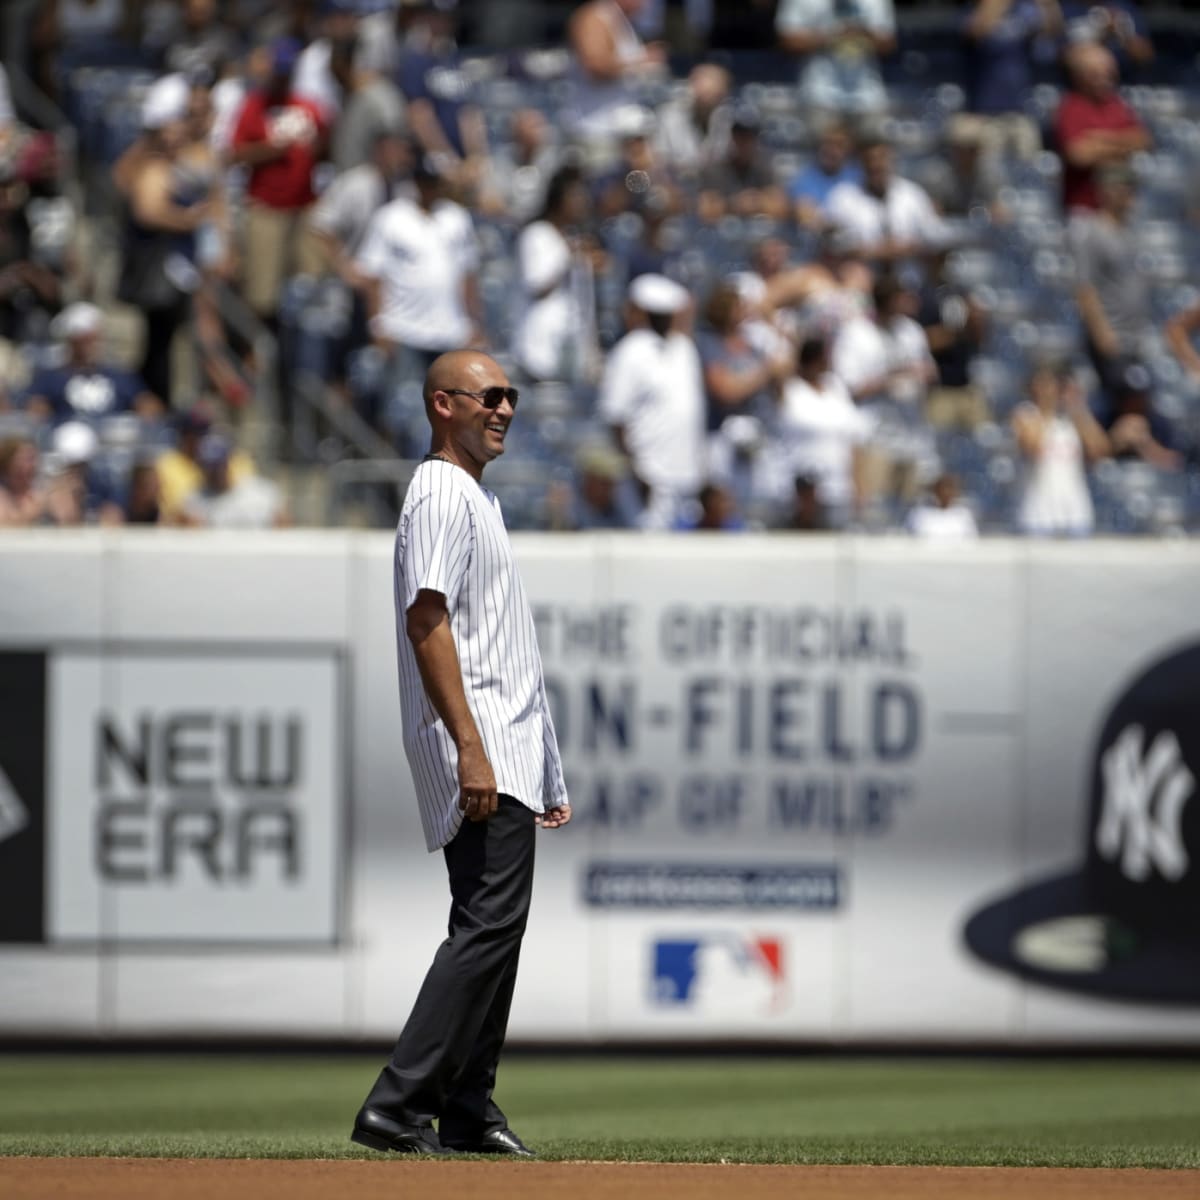 Derek Jeter says he would have moved out of New York City if Yankees lost  to Mets in 2000 World Series